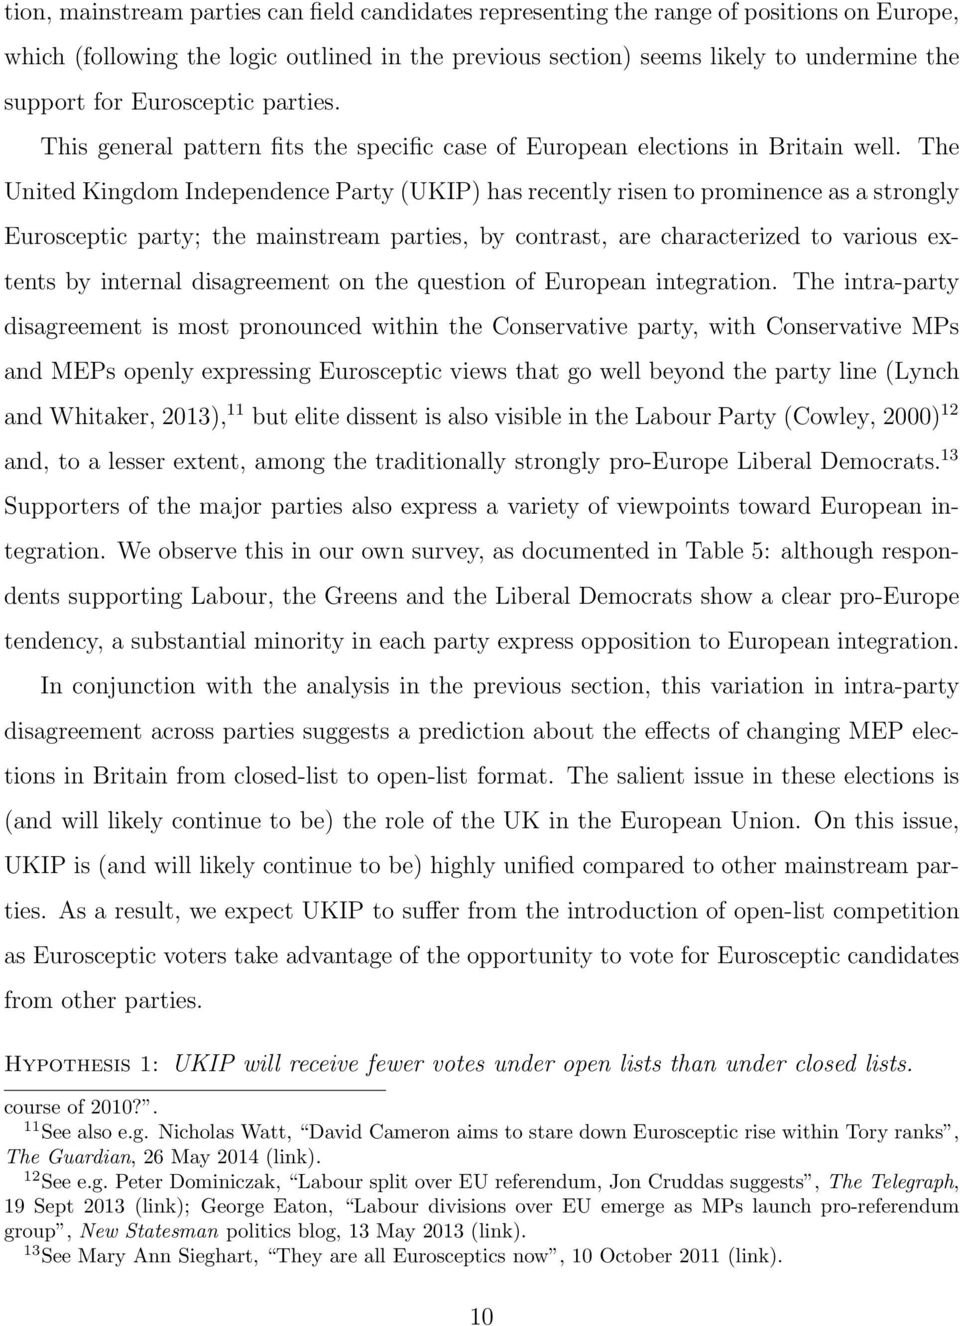 The United Kingdom Independence Party (UKIP) has recently risen to prominence as a strongly Eurosceptic party; the mainstream parties, by contrast, are characterized to various extents by internal